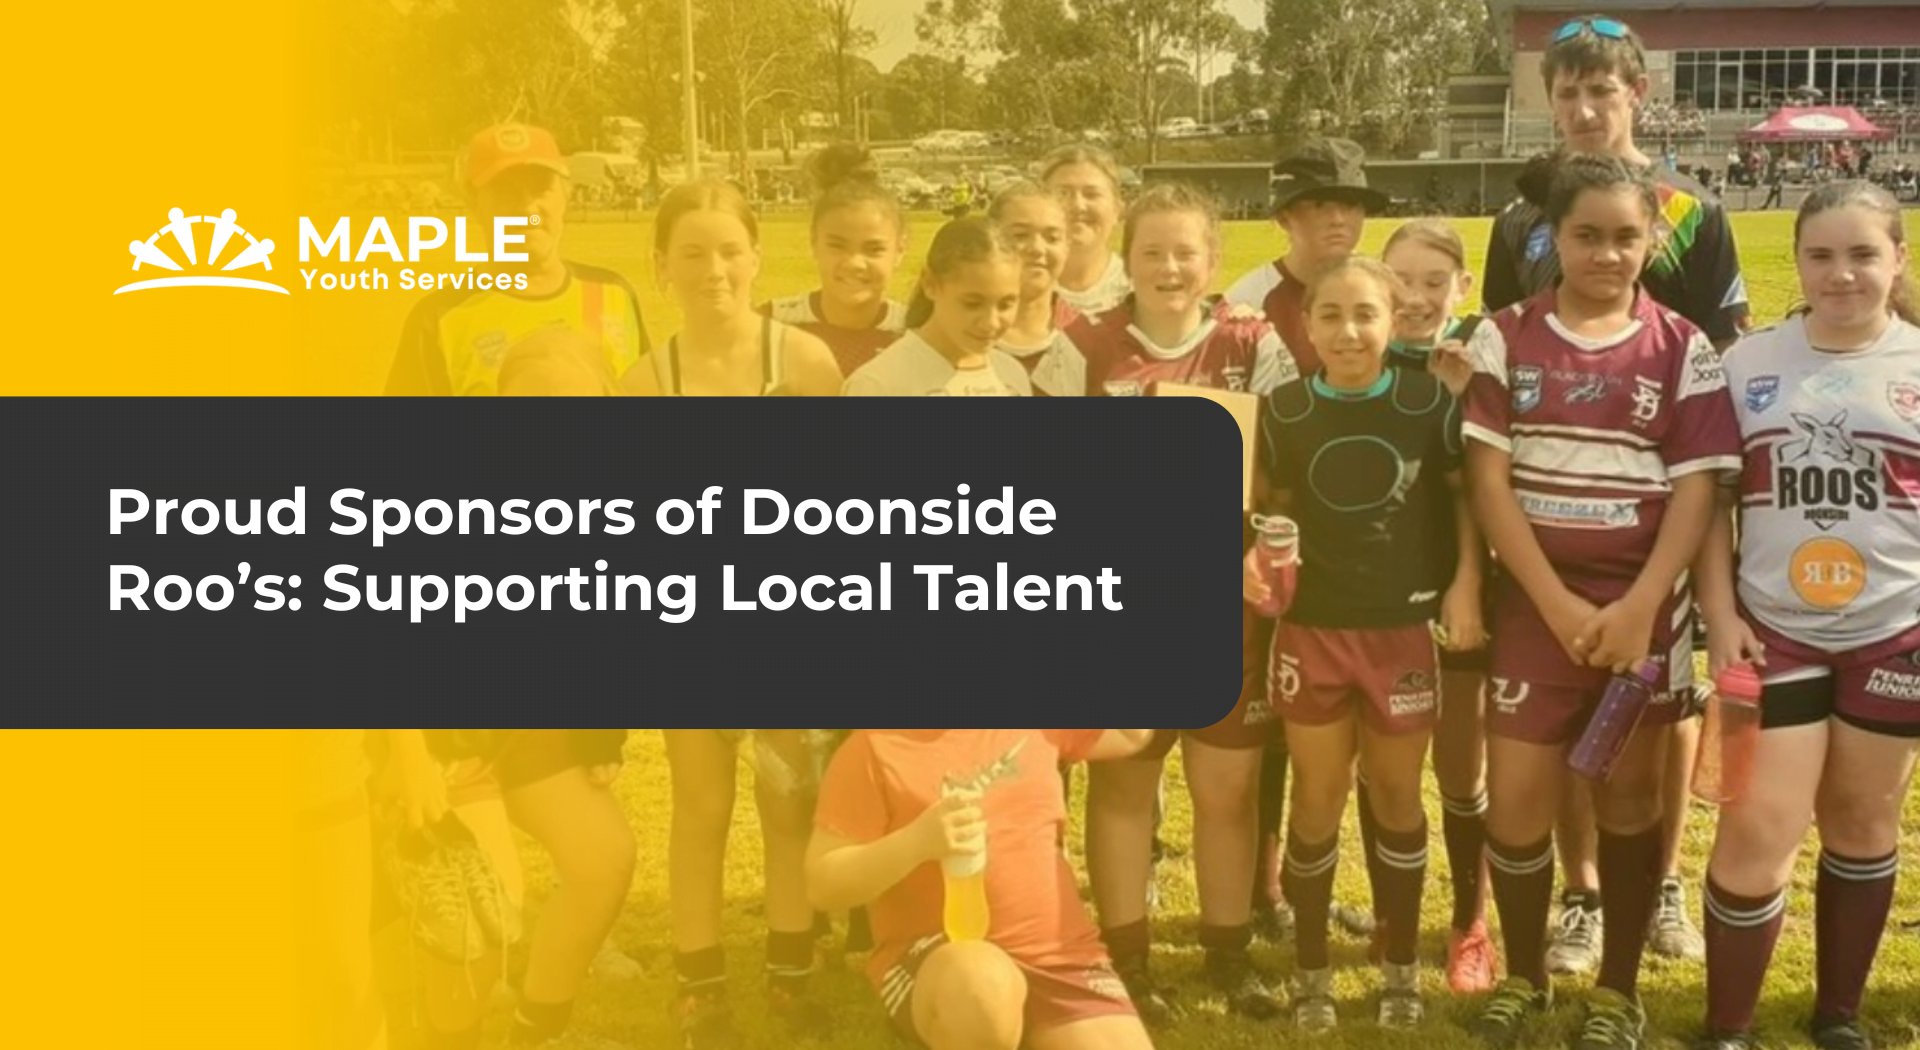 Proud Sponsors of Doonside Roo’s: Supporting Local Talent